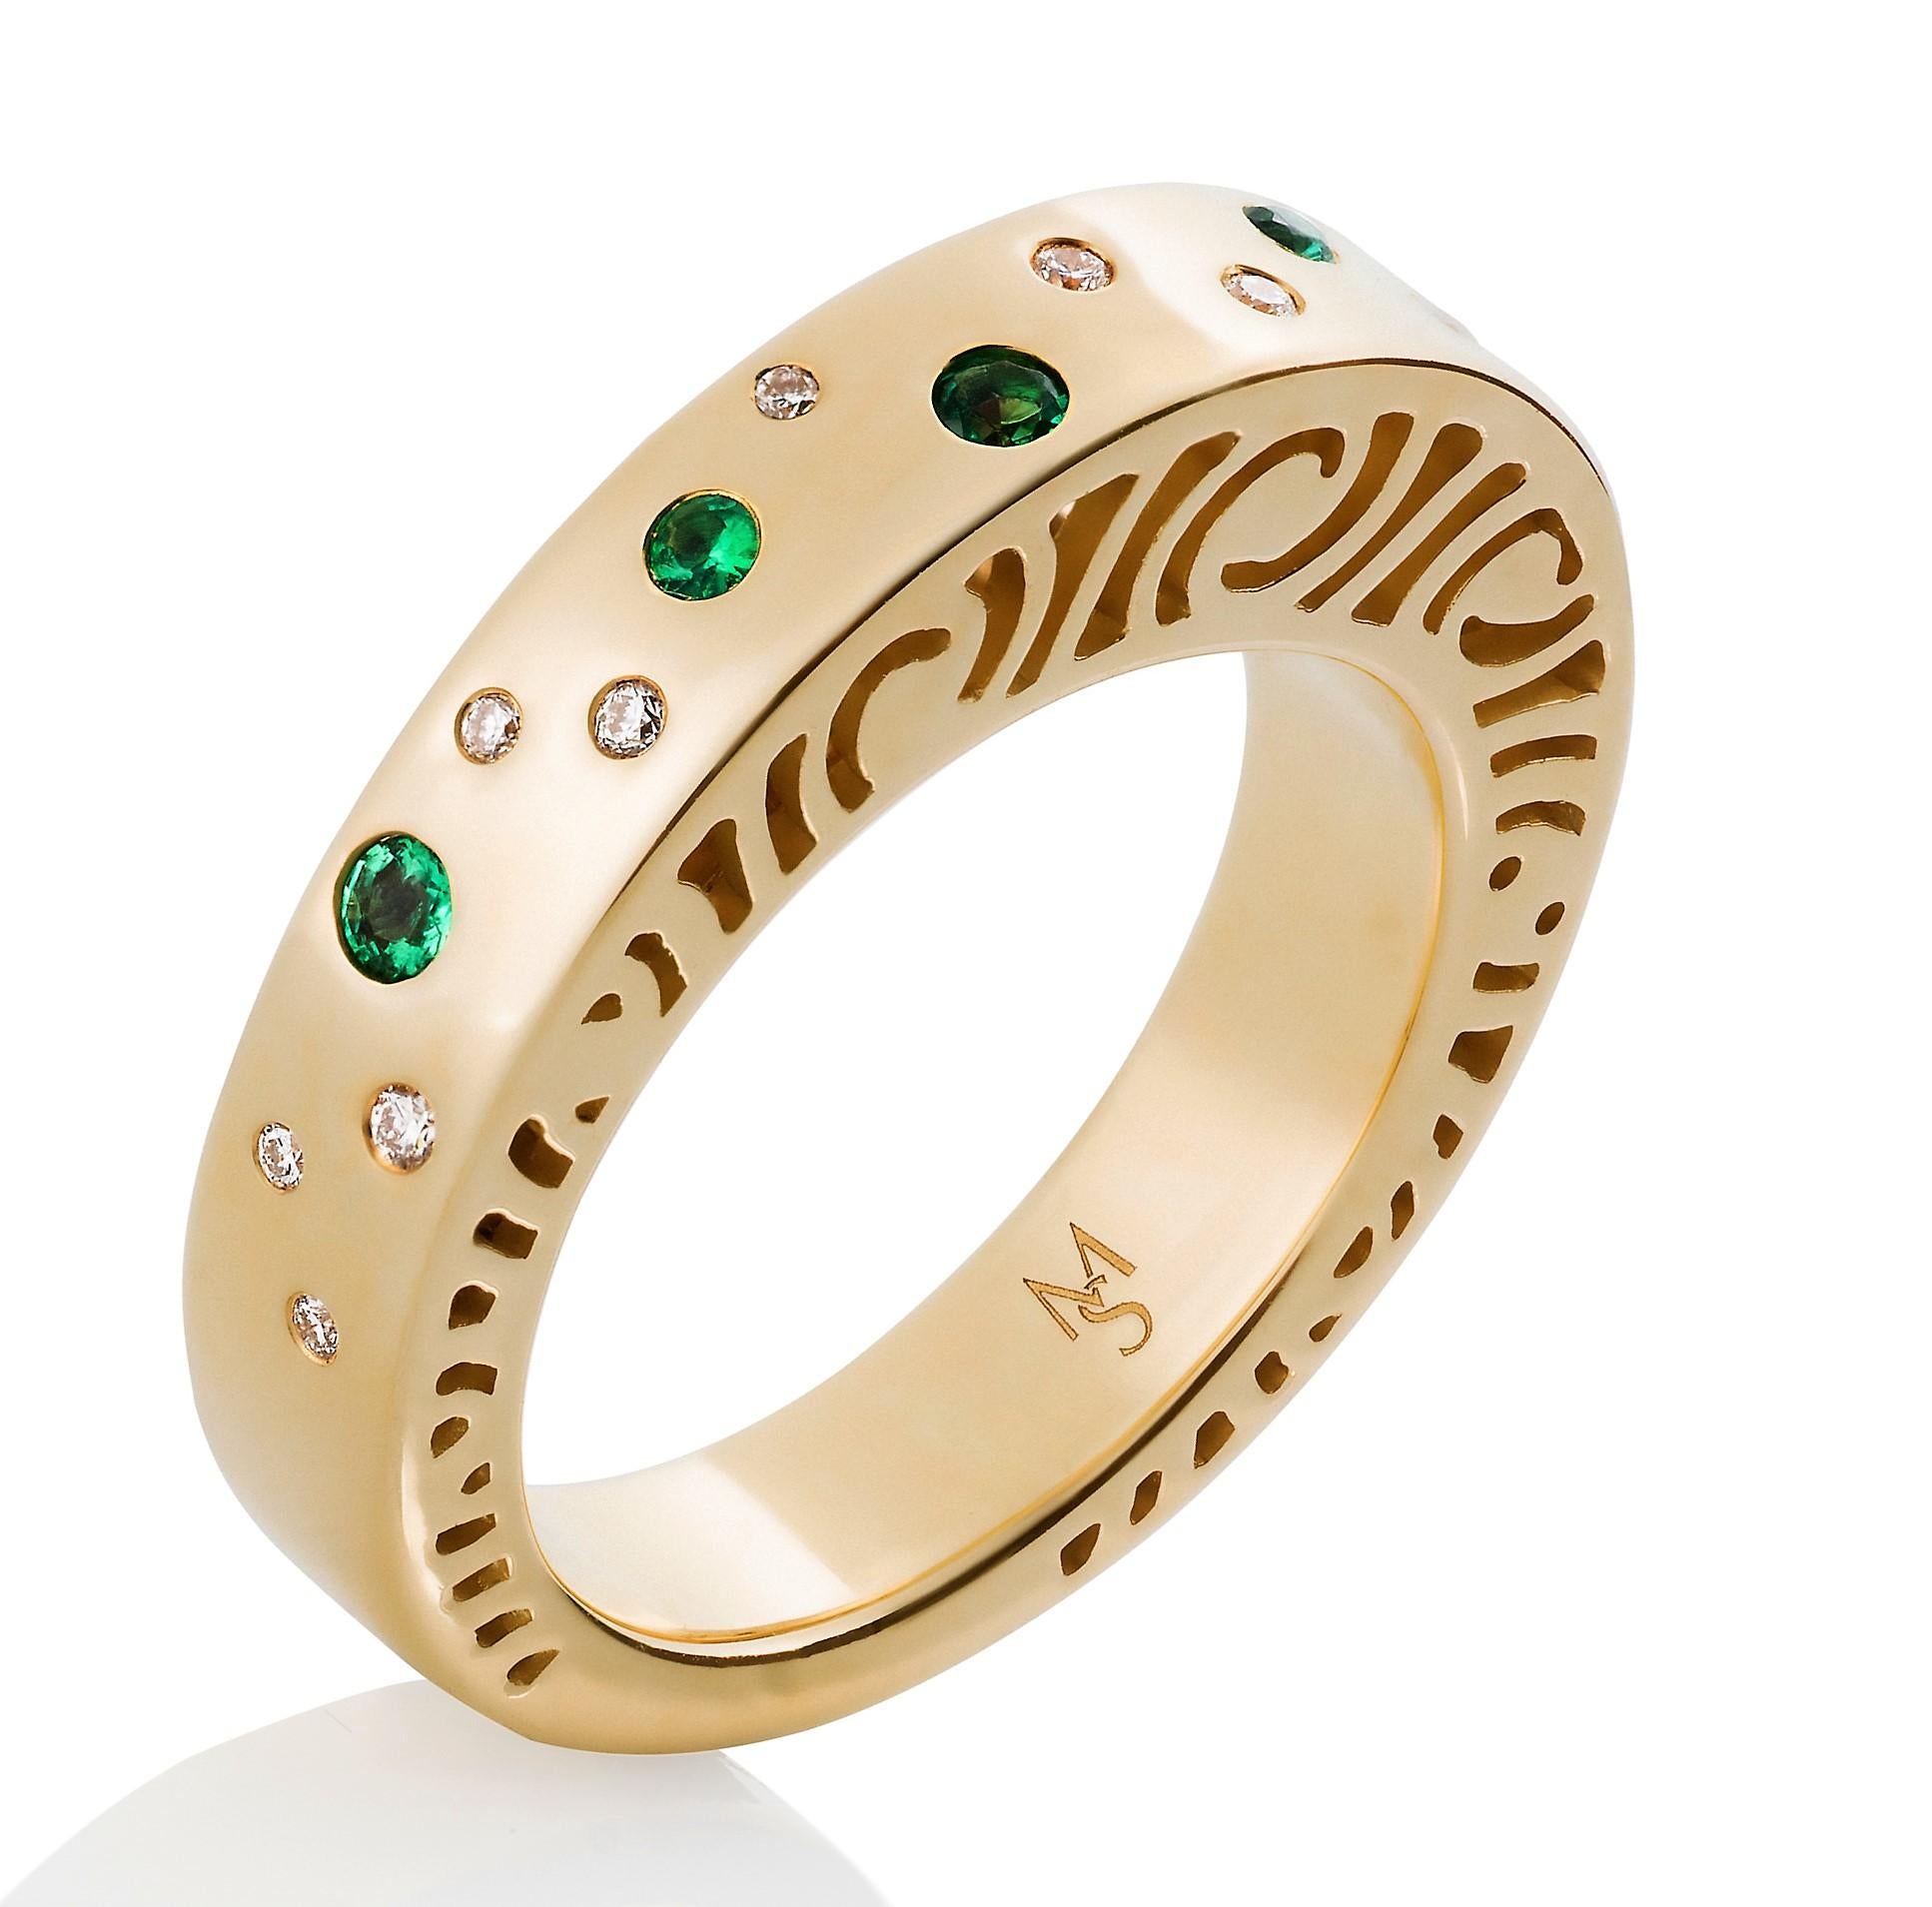 The sleek 5mm wide, diamond and emerald Shooting Stars stacking ring in 14ky is the wide band that was designed to stack with all the other rings in the Shooting Stars collection. The sides are high polished to almost a mirror finish and the